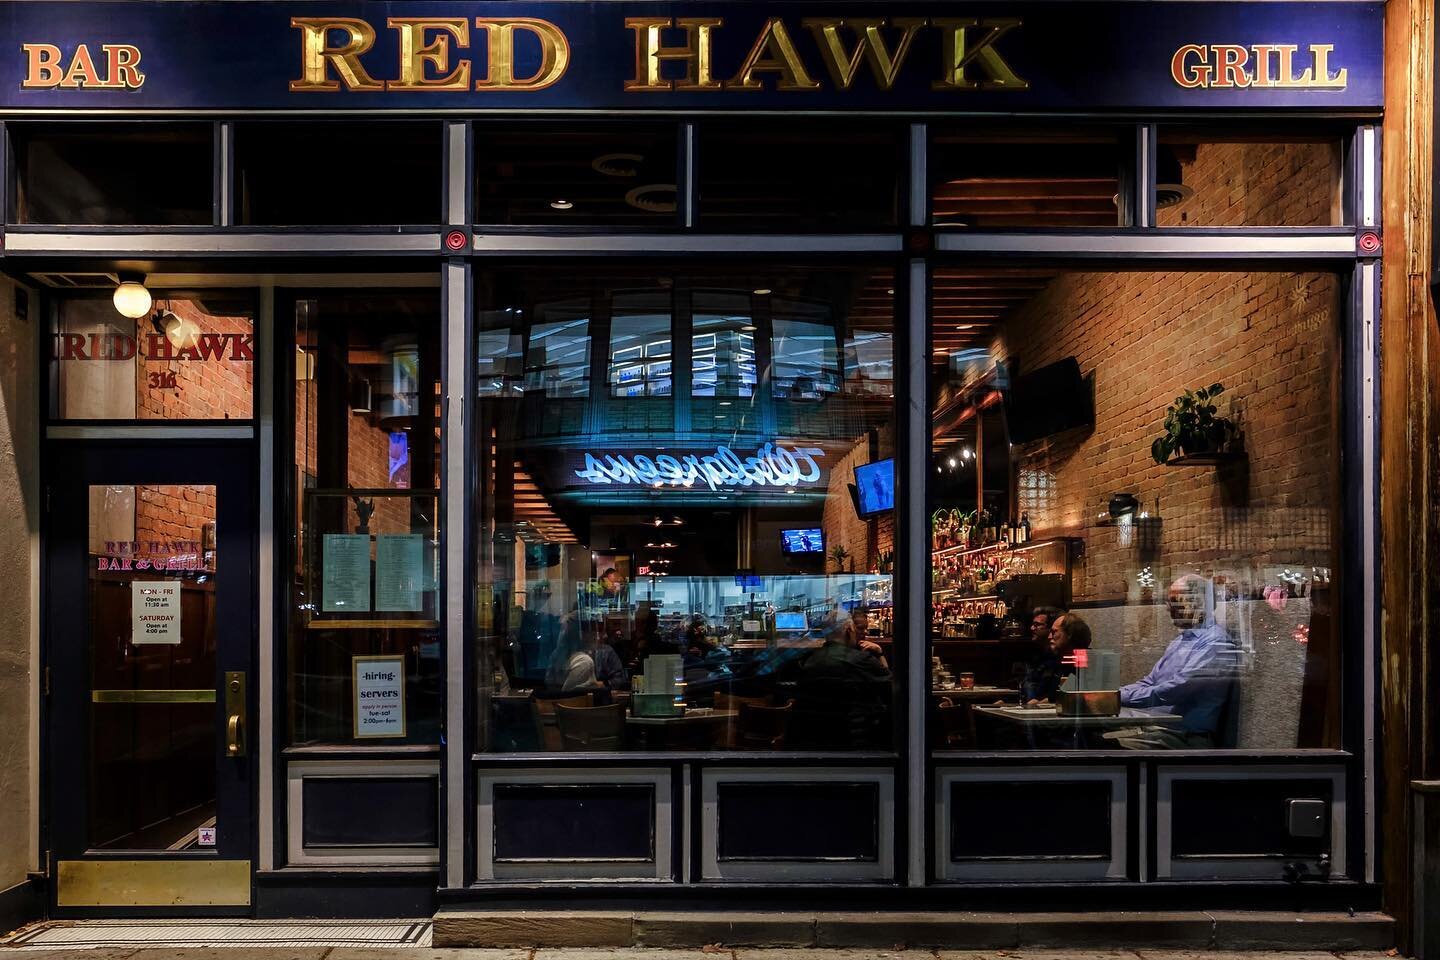 &quot;Red Hawk&quot;

The Red Hawk Bar and Grill on the peripheral of the UWM campus Ann Arbor, MI in low light and after a good down pour.

📸 Fujifilm XT-4, XF16mmF1.4 R WR

@raw_potd raw_world @raw_edit @raw_depthoffield @raw_community  #raw_archi